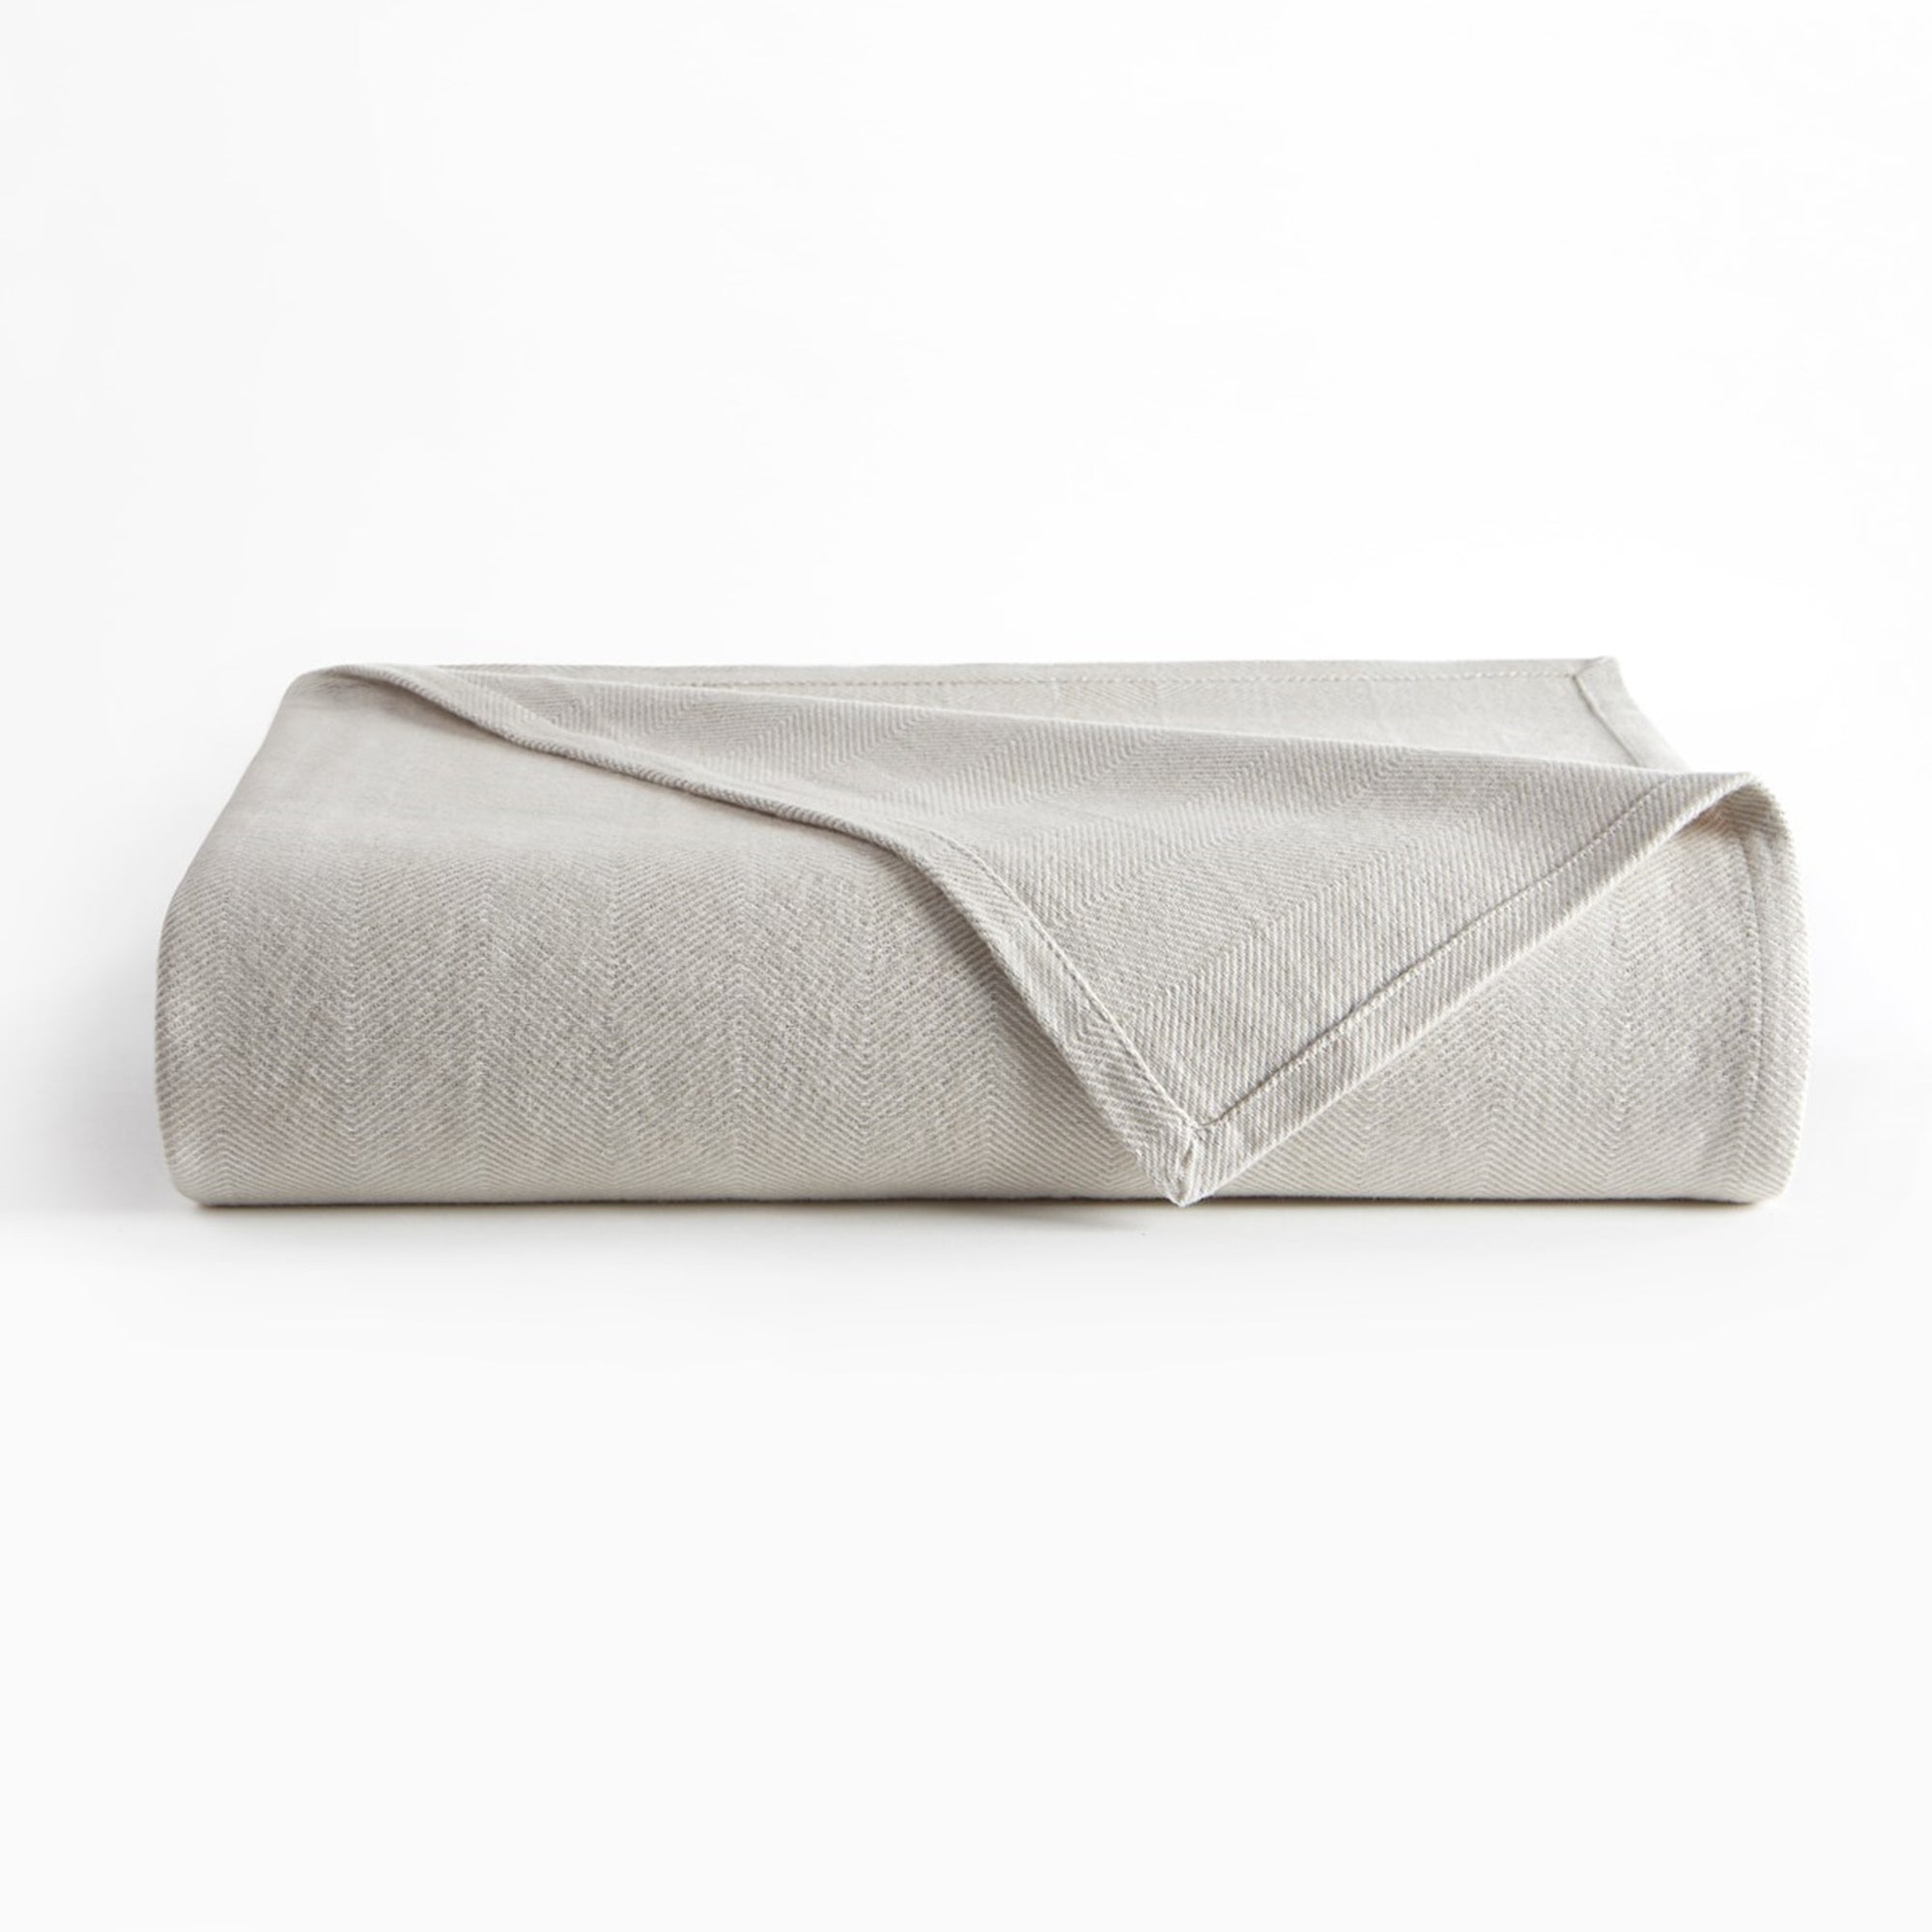 Clear Image of Downtown Company Herringbone Blanket Charcoal in Taupe White Color